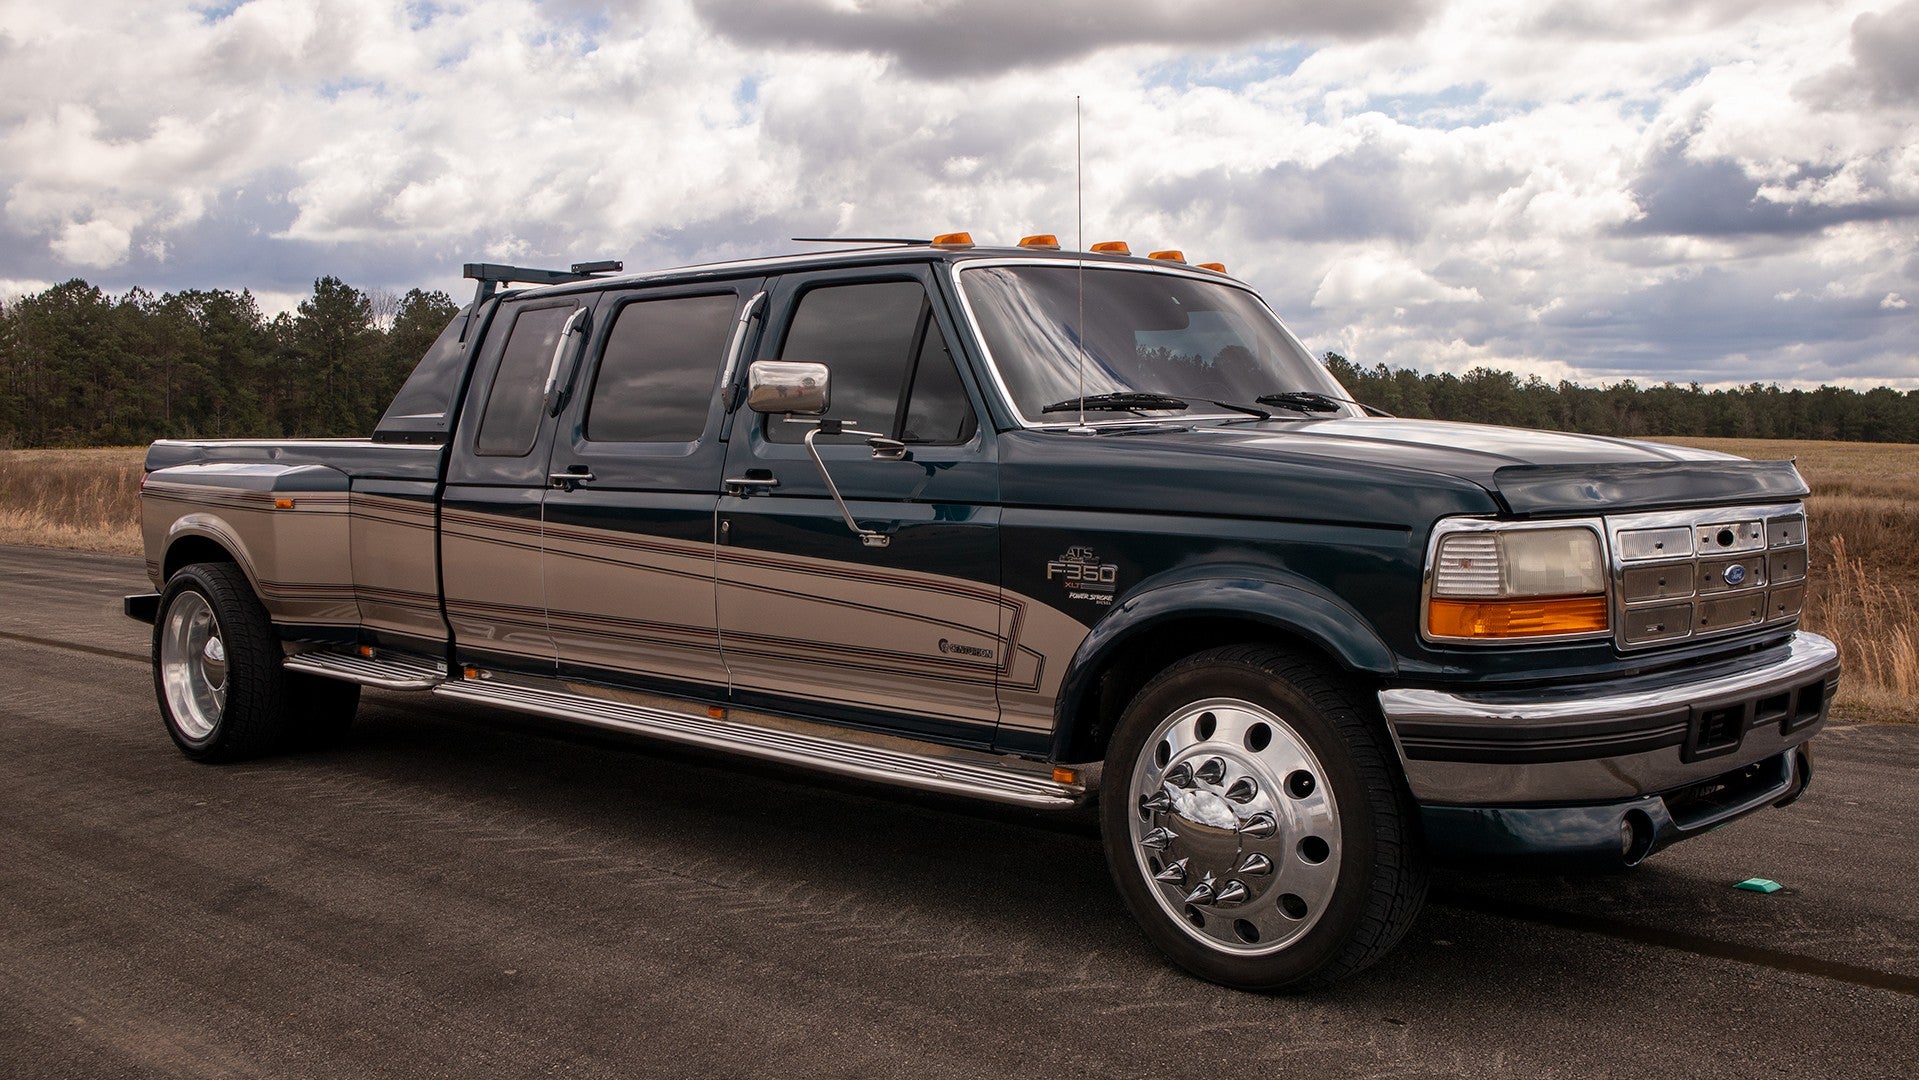 This Ford F-350 Centurion Power Stroke 7.3L Has an Interior as Plush as the...